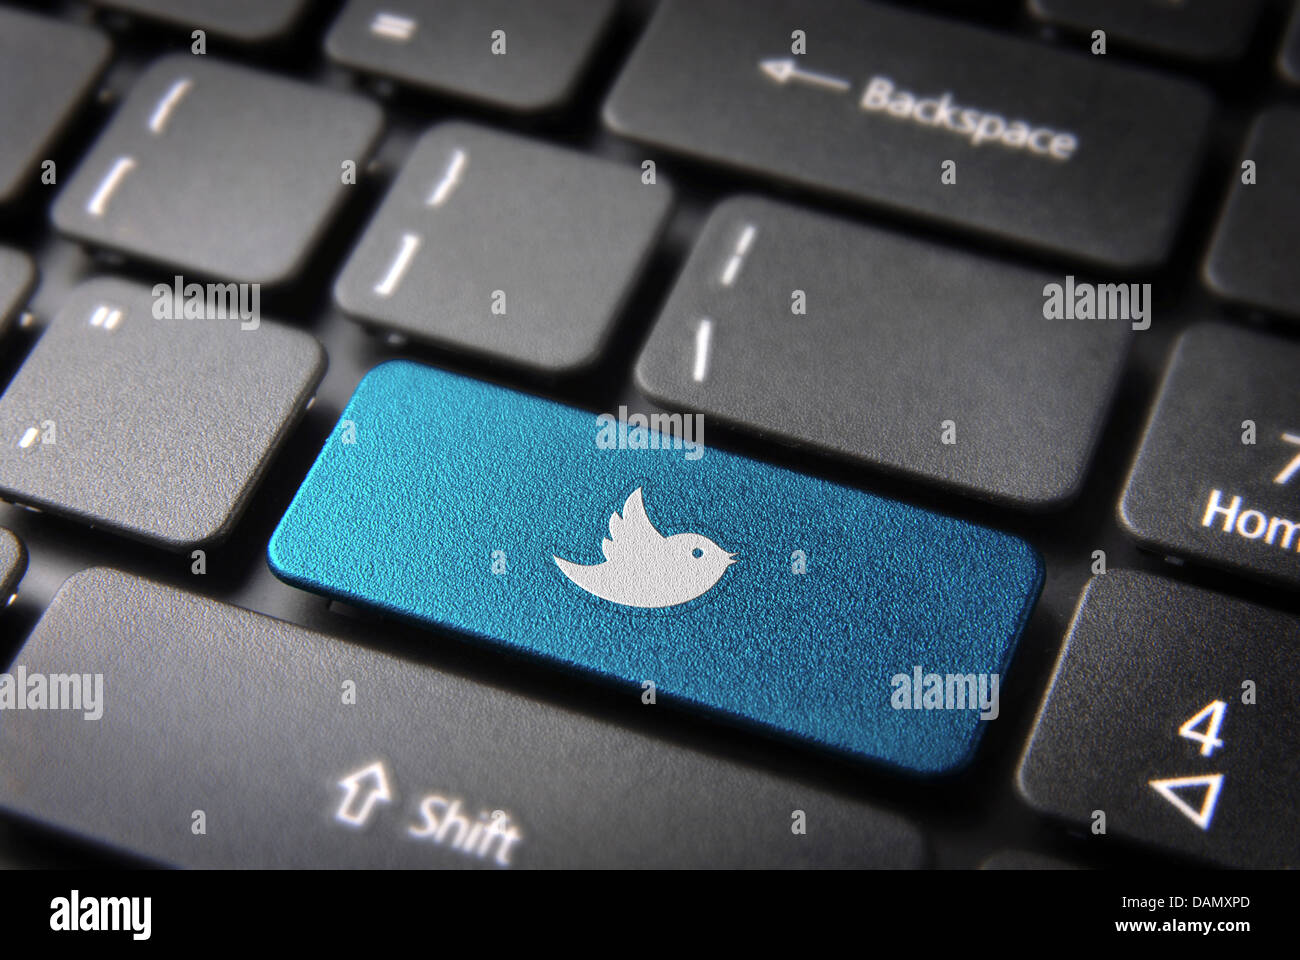 Socialmedia key with twitter bird icon on laptop keyboard. Included clipping path, so you can easily edit it. Stock Photo